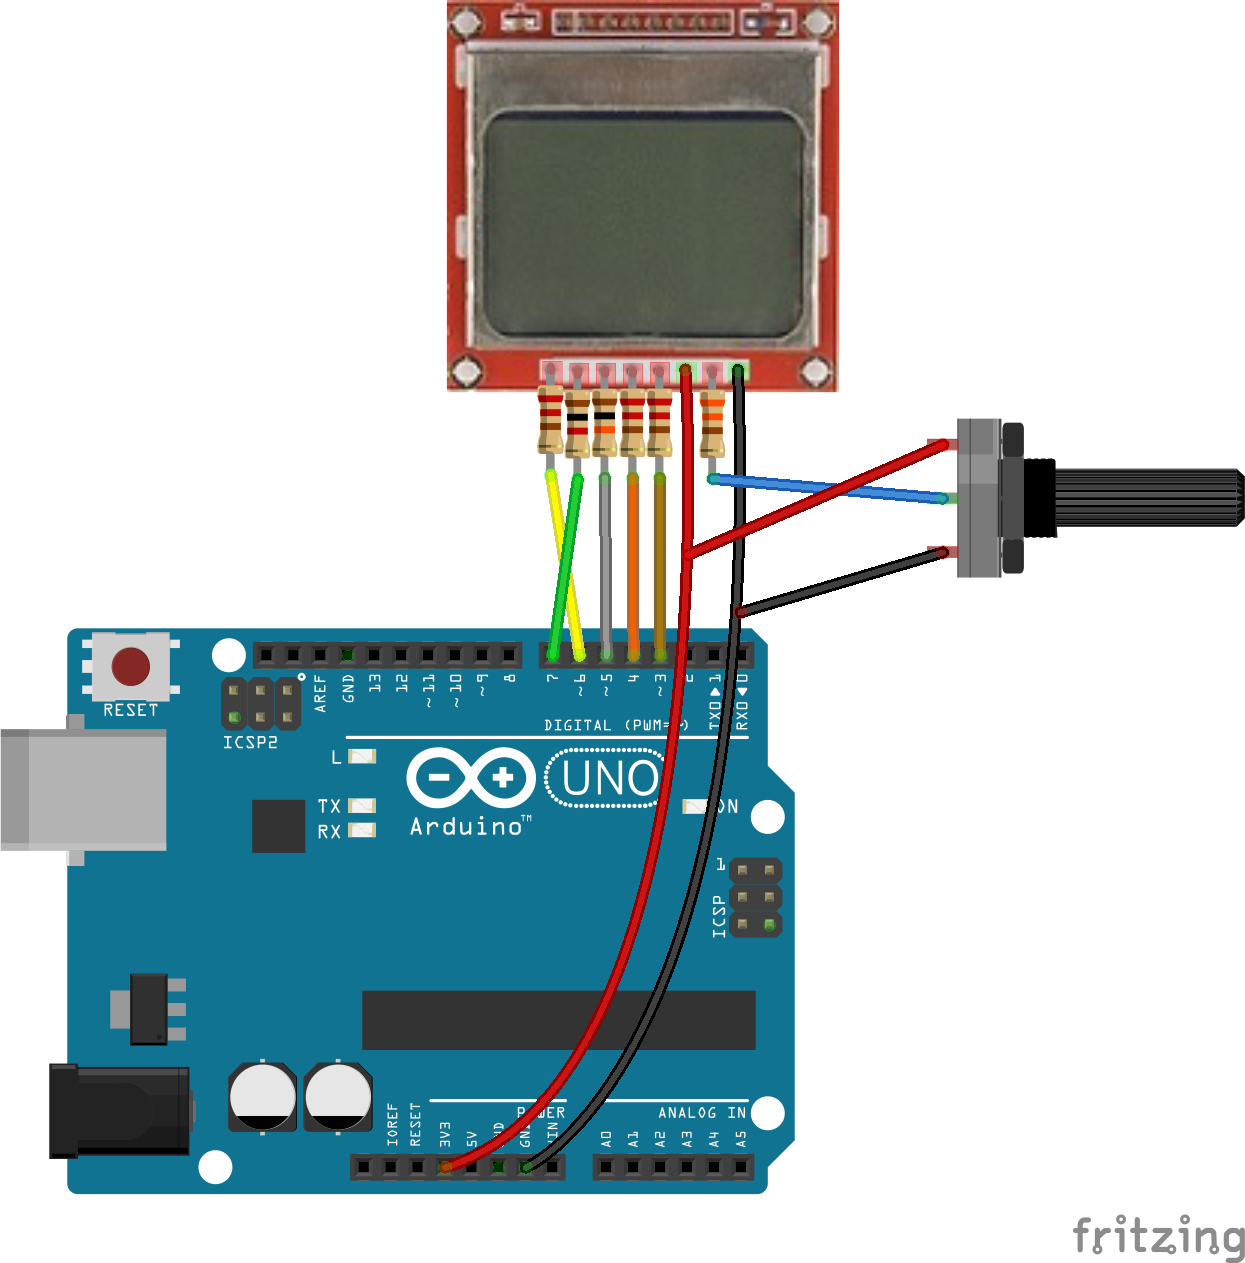 Nokia 5110 Lcd With Arduino Uno